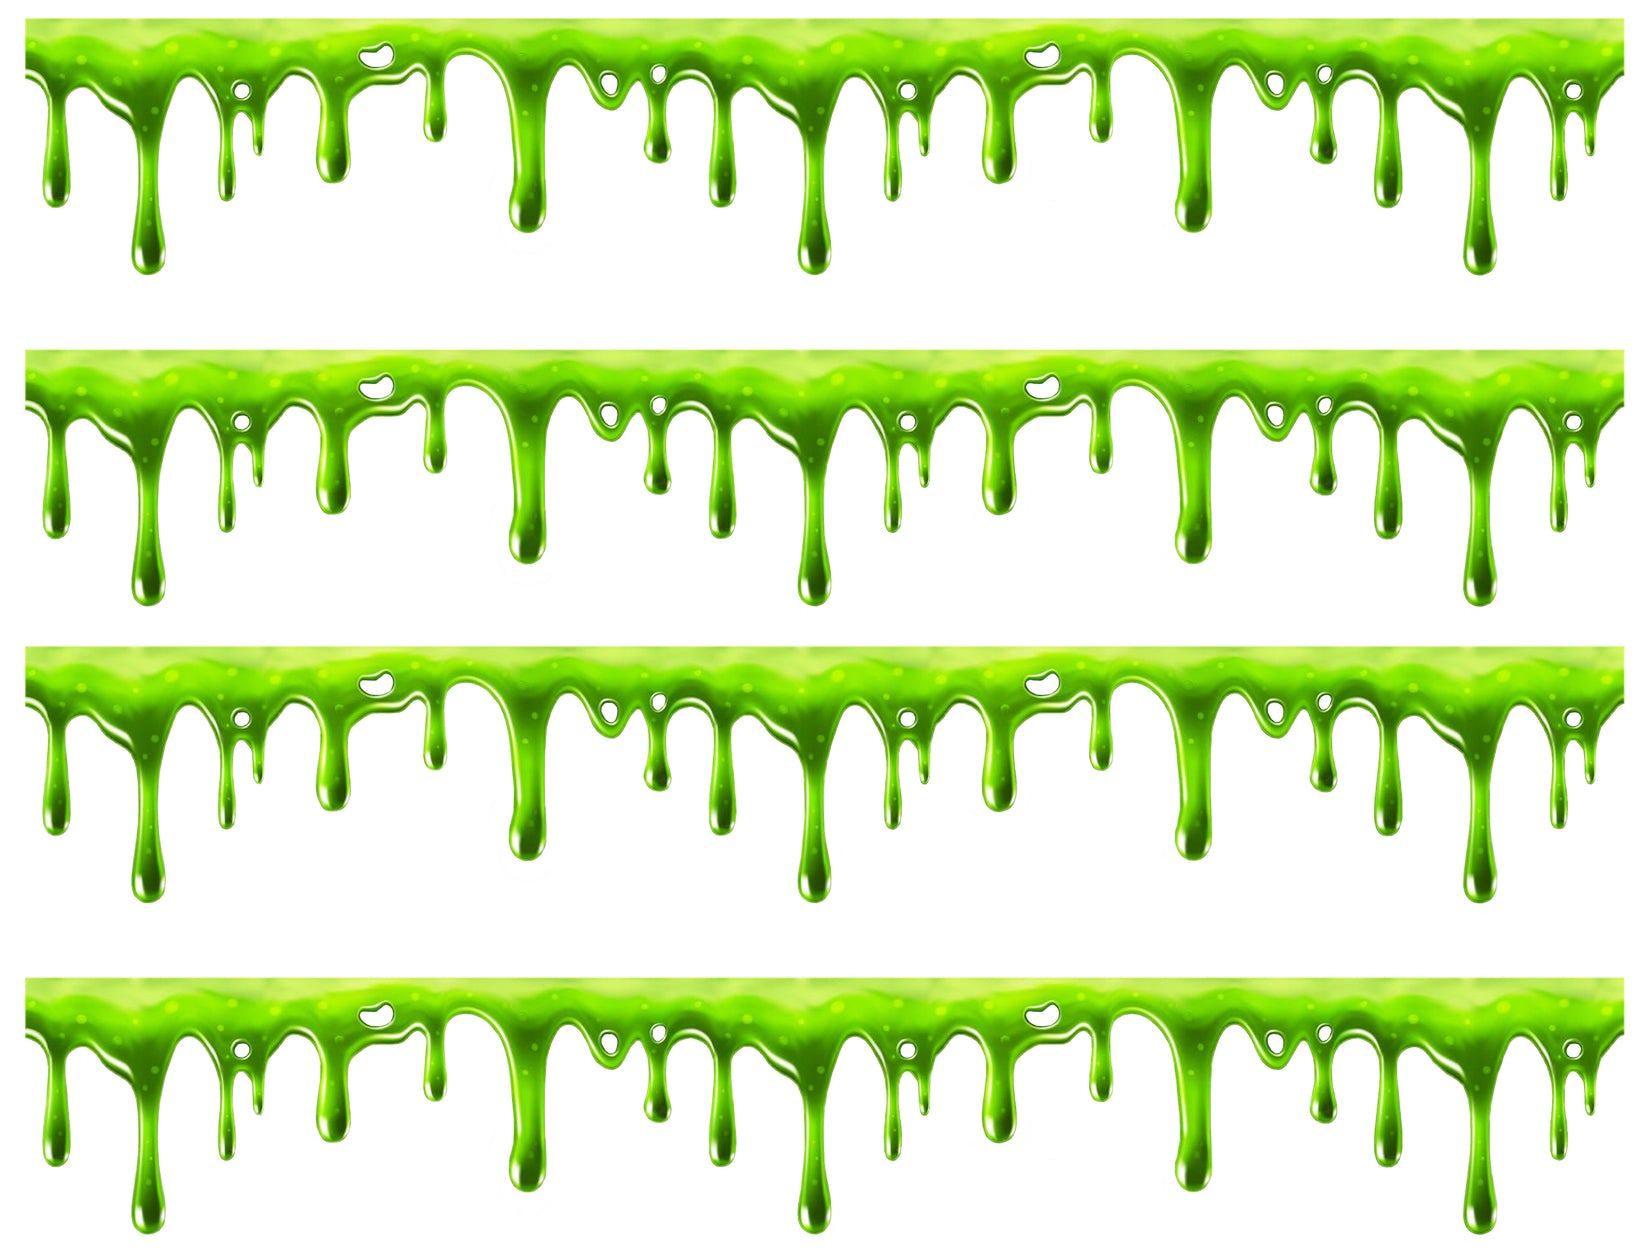 Green Dripping Slime Edible Cake Topper Image Strips ABPID49745